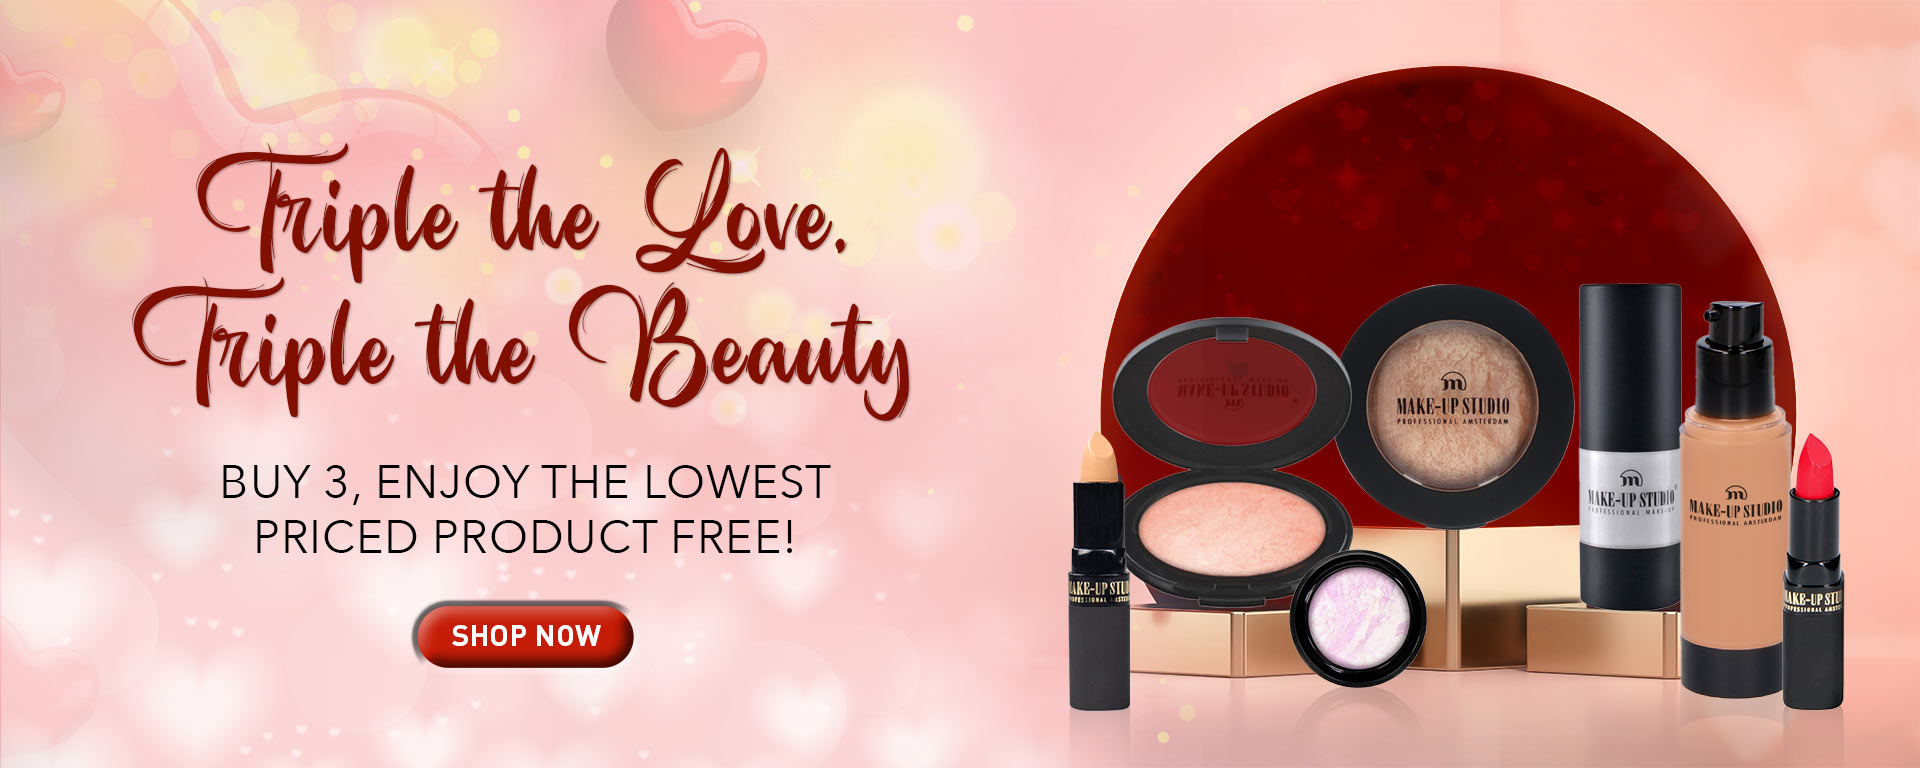 Make-Up Studio: Buy Luxury Cosmetics and Make up Products Online